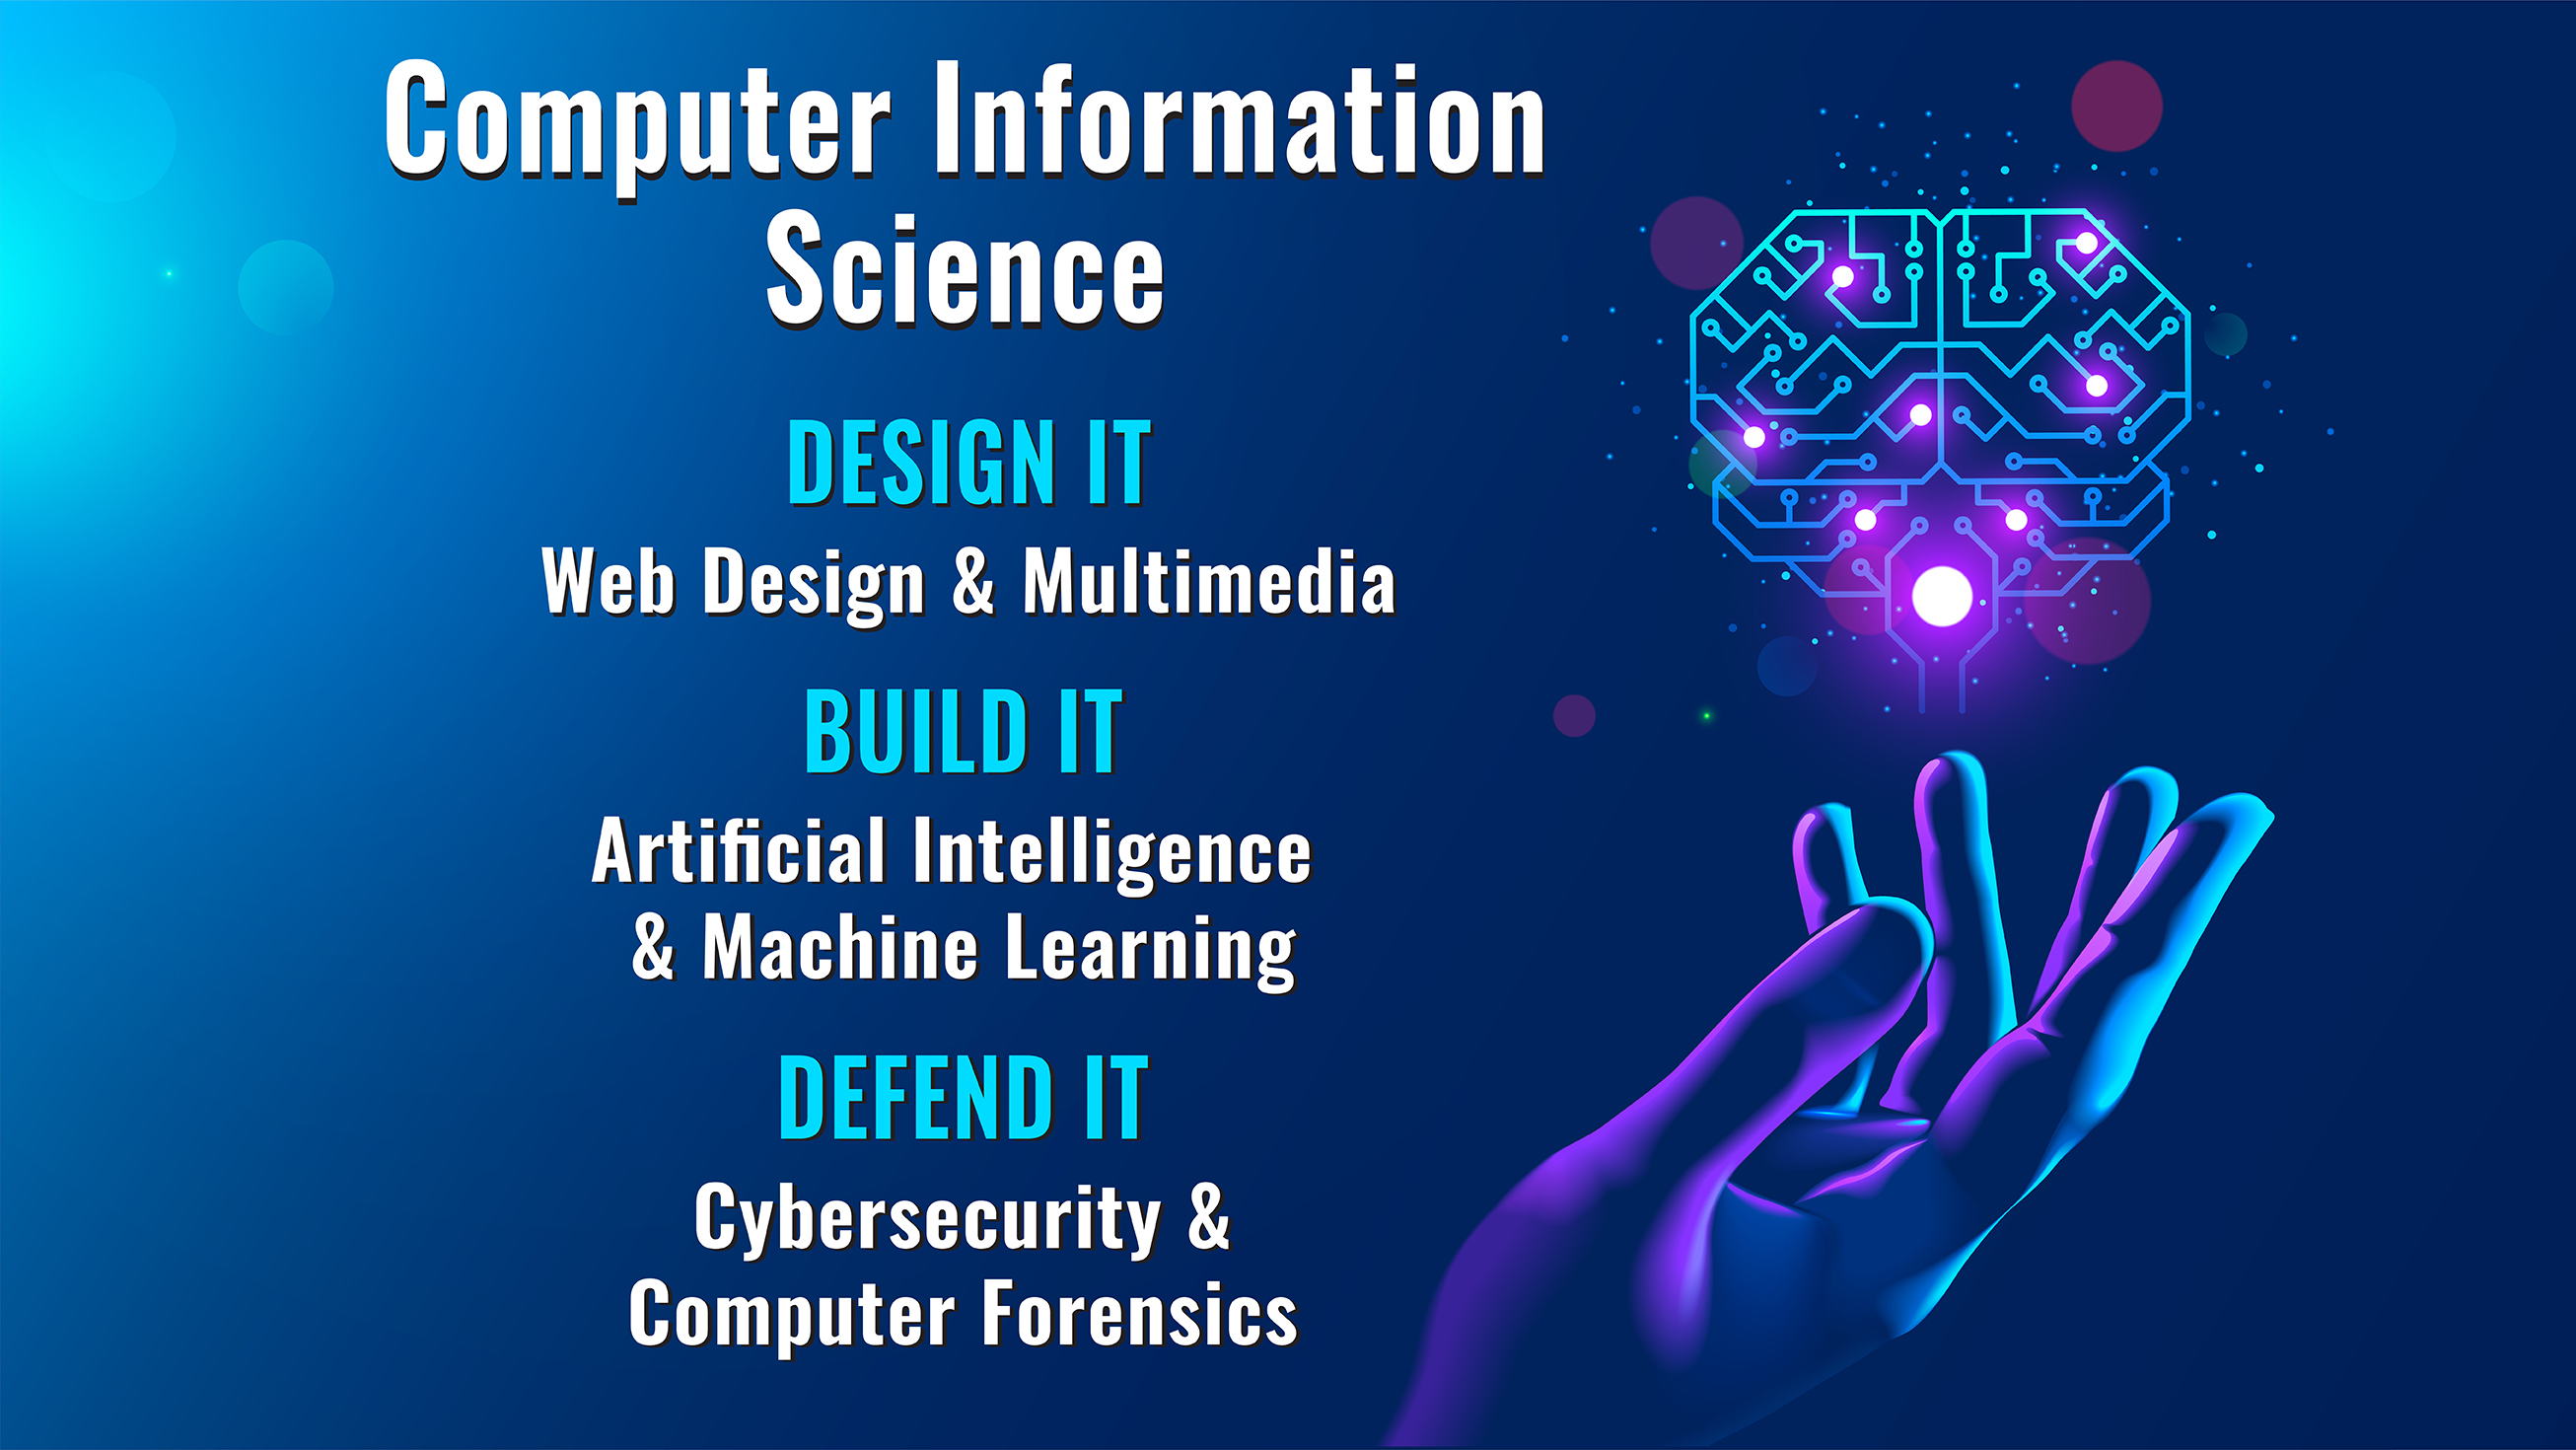 Computer Information Science degree